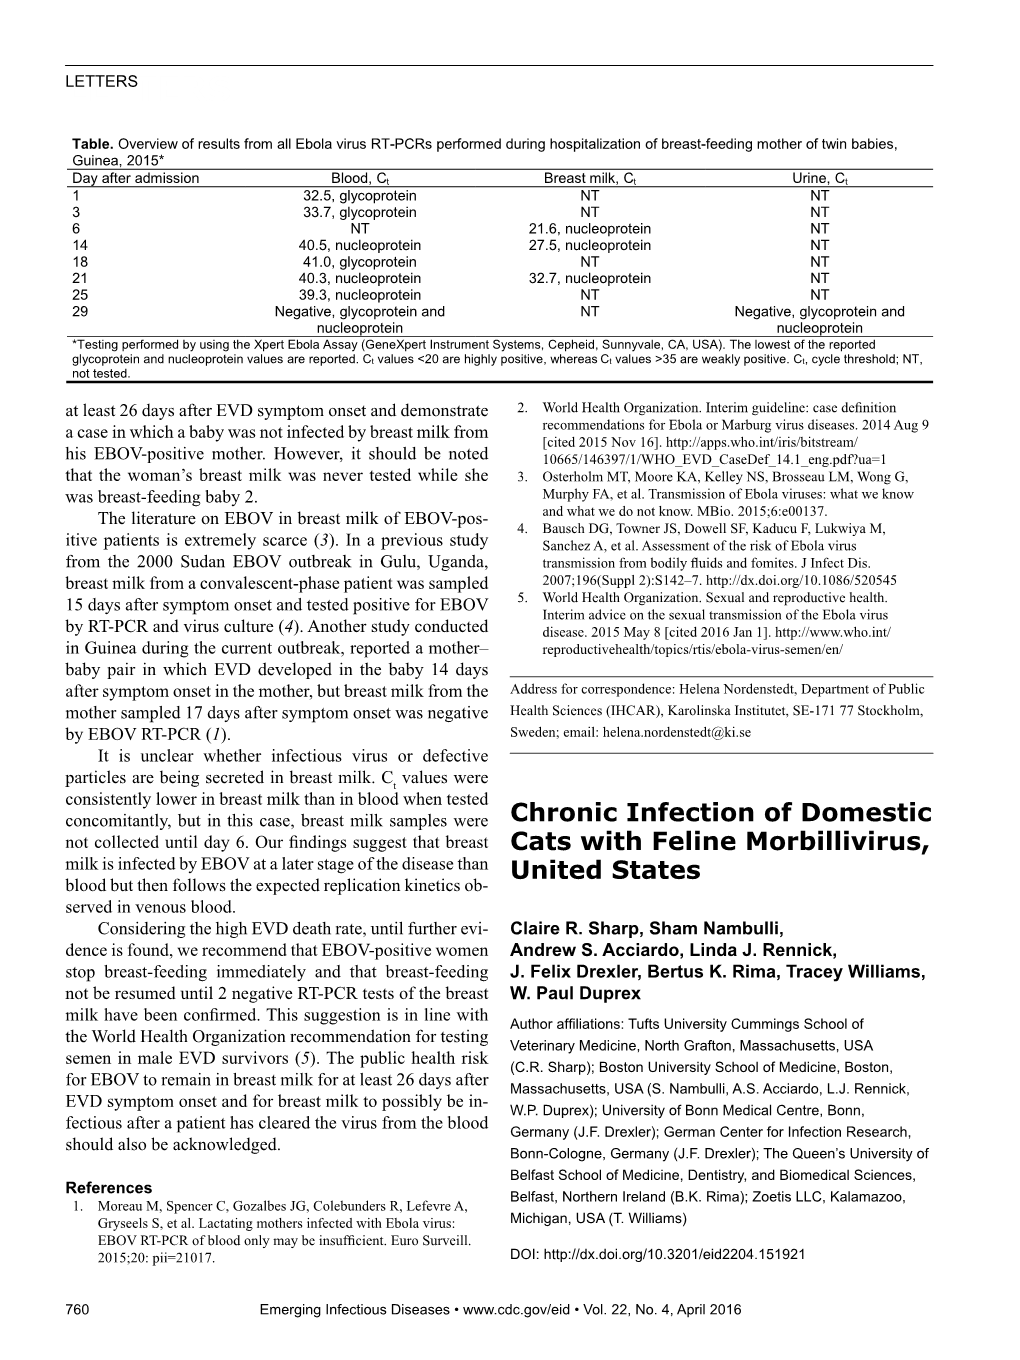 Chronic Infection of Domestic Cats with Feline Morbillivirus, United States